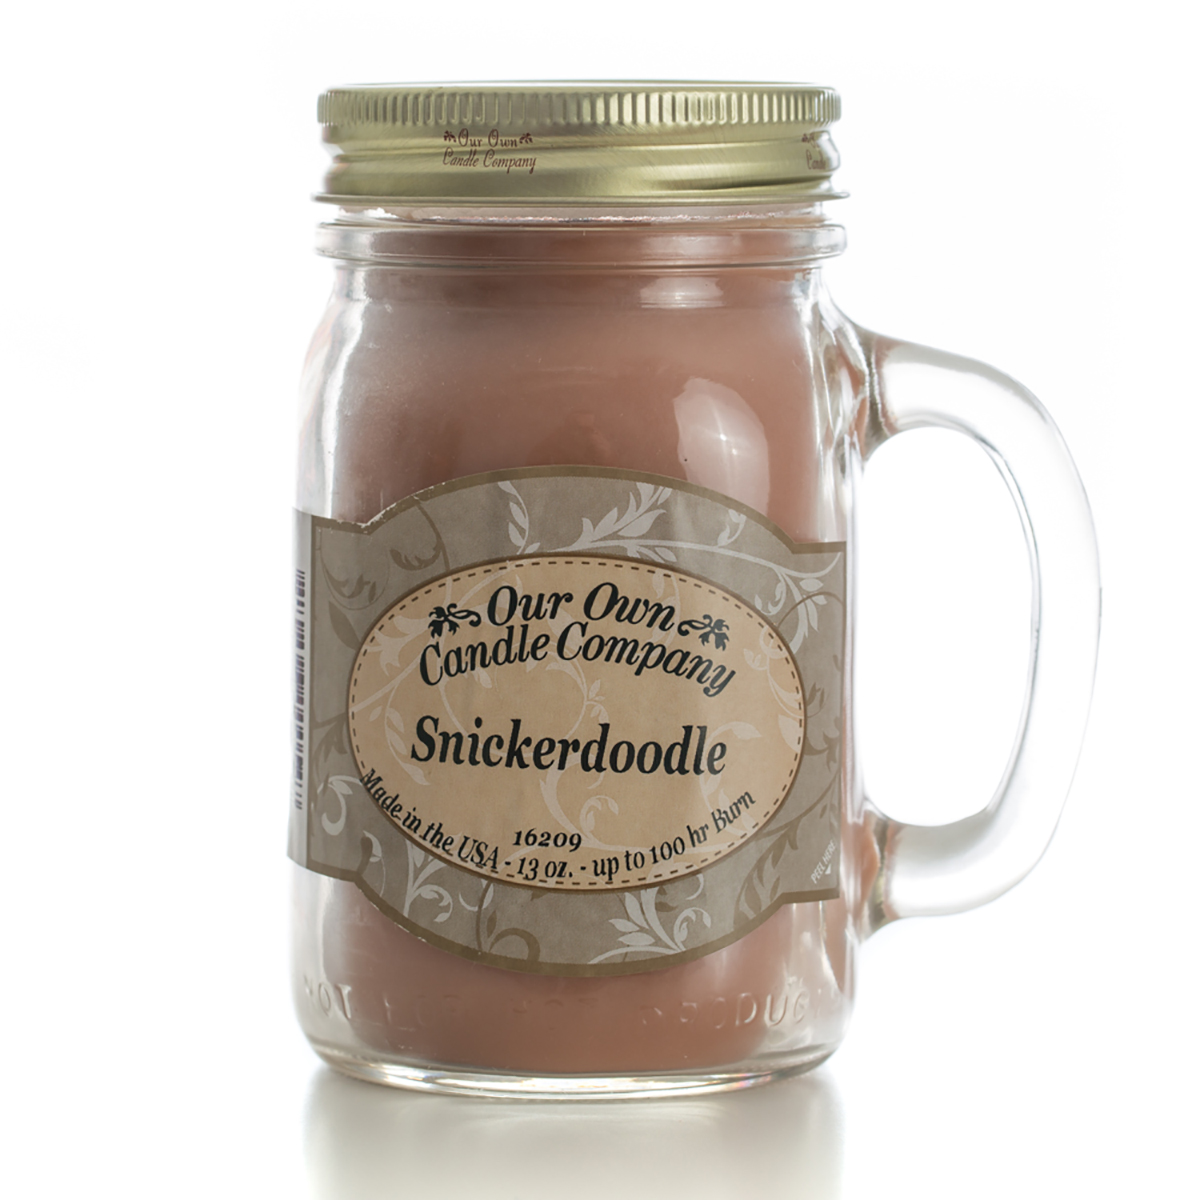 Our Own Candle Company 13oz. Snickerdoodle Jar Candle